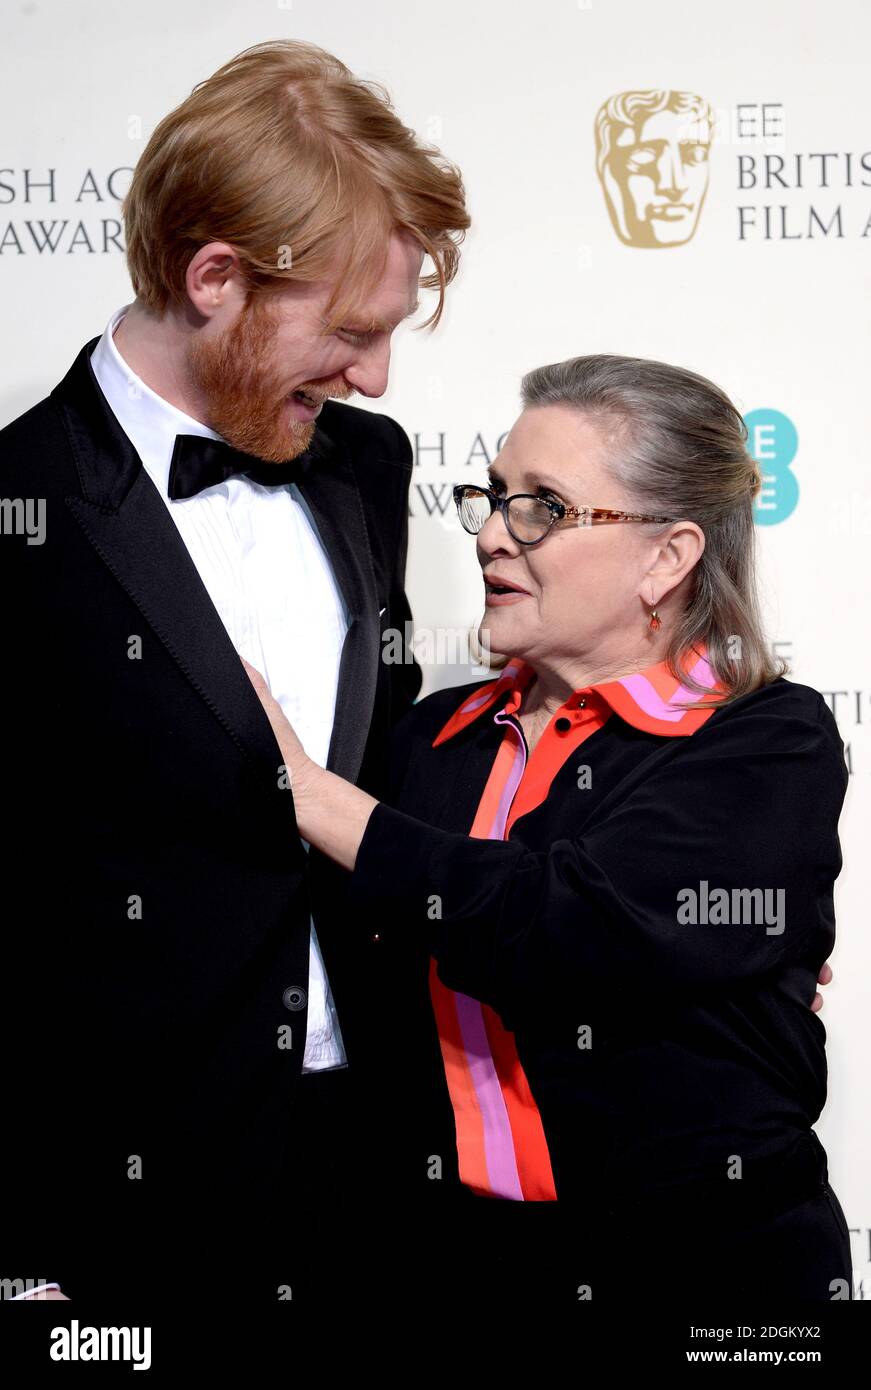 Domhnall Gleeson and Carrie Fisher in the press room during the EE British Academy Film Awards at the Royal Opera House, Bow Street, London.  EMPICS Entertainment Photo. Picture date: Sunday February 14, 2016. Photo credit should read: Doug Peters/ EMPICS Entertainment Stock Photo